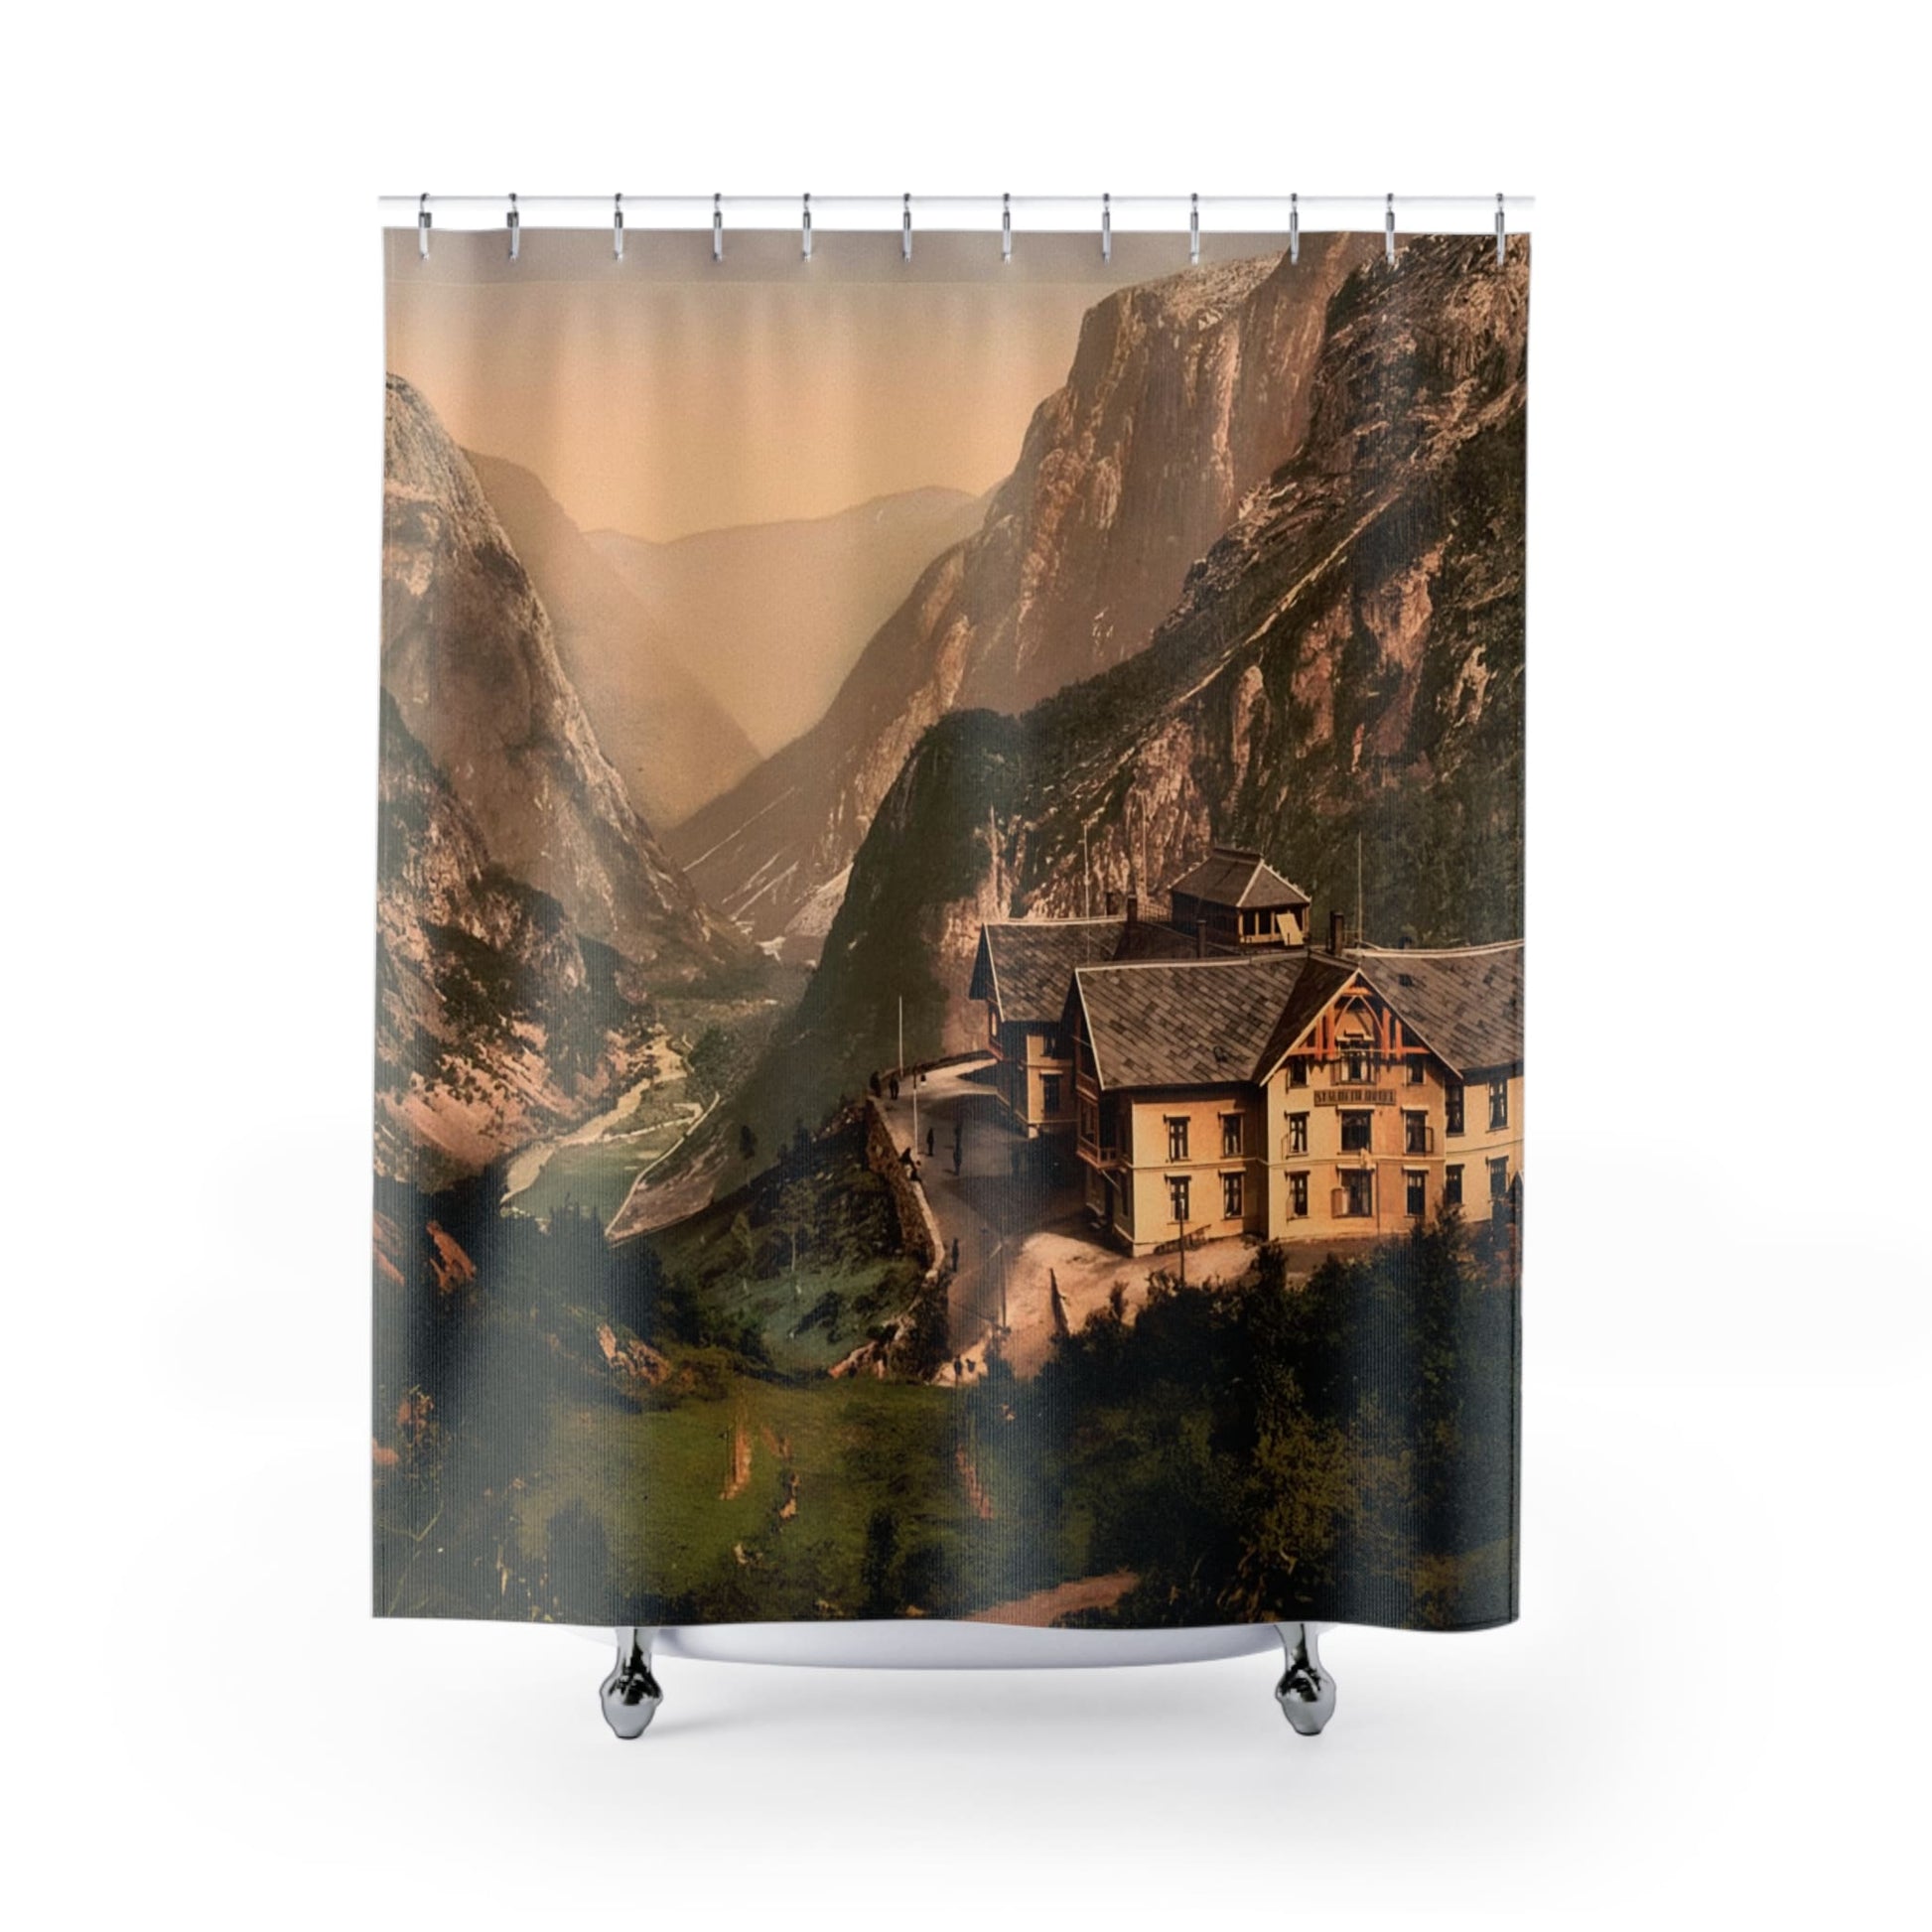 Vintage Mountain Hotel Shower Curtain with scenic landscape design, picturesque bathroom decor showcasing mountain views.